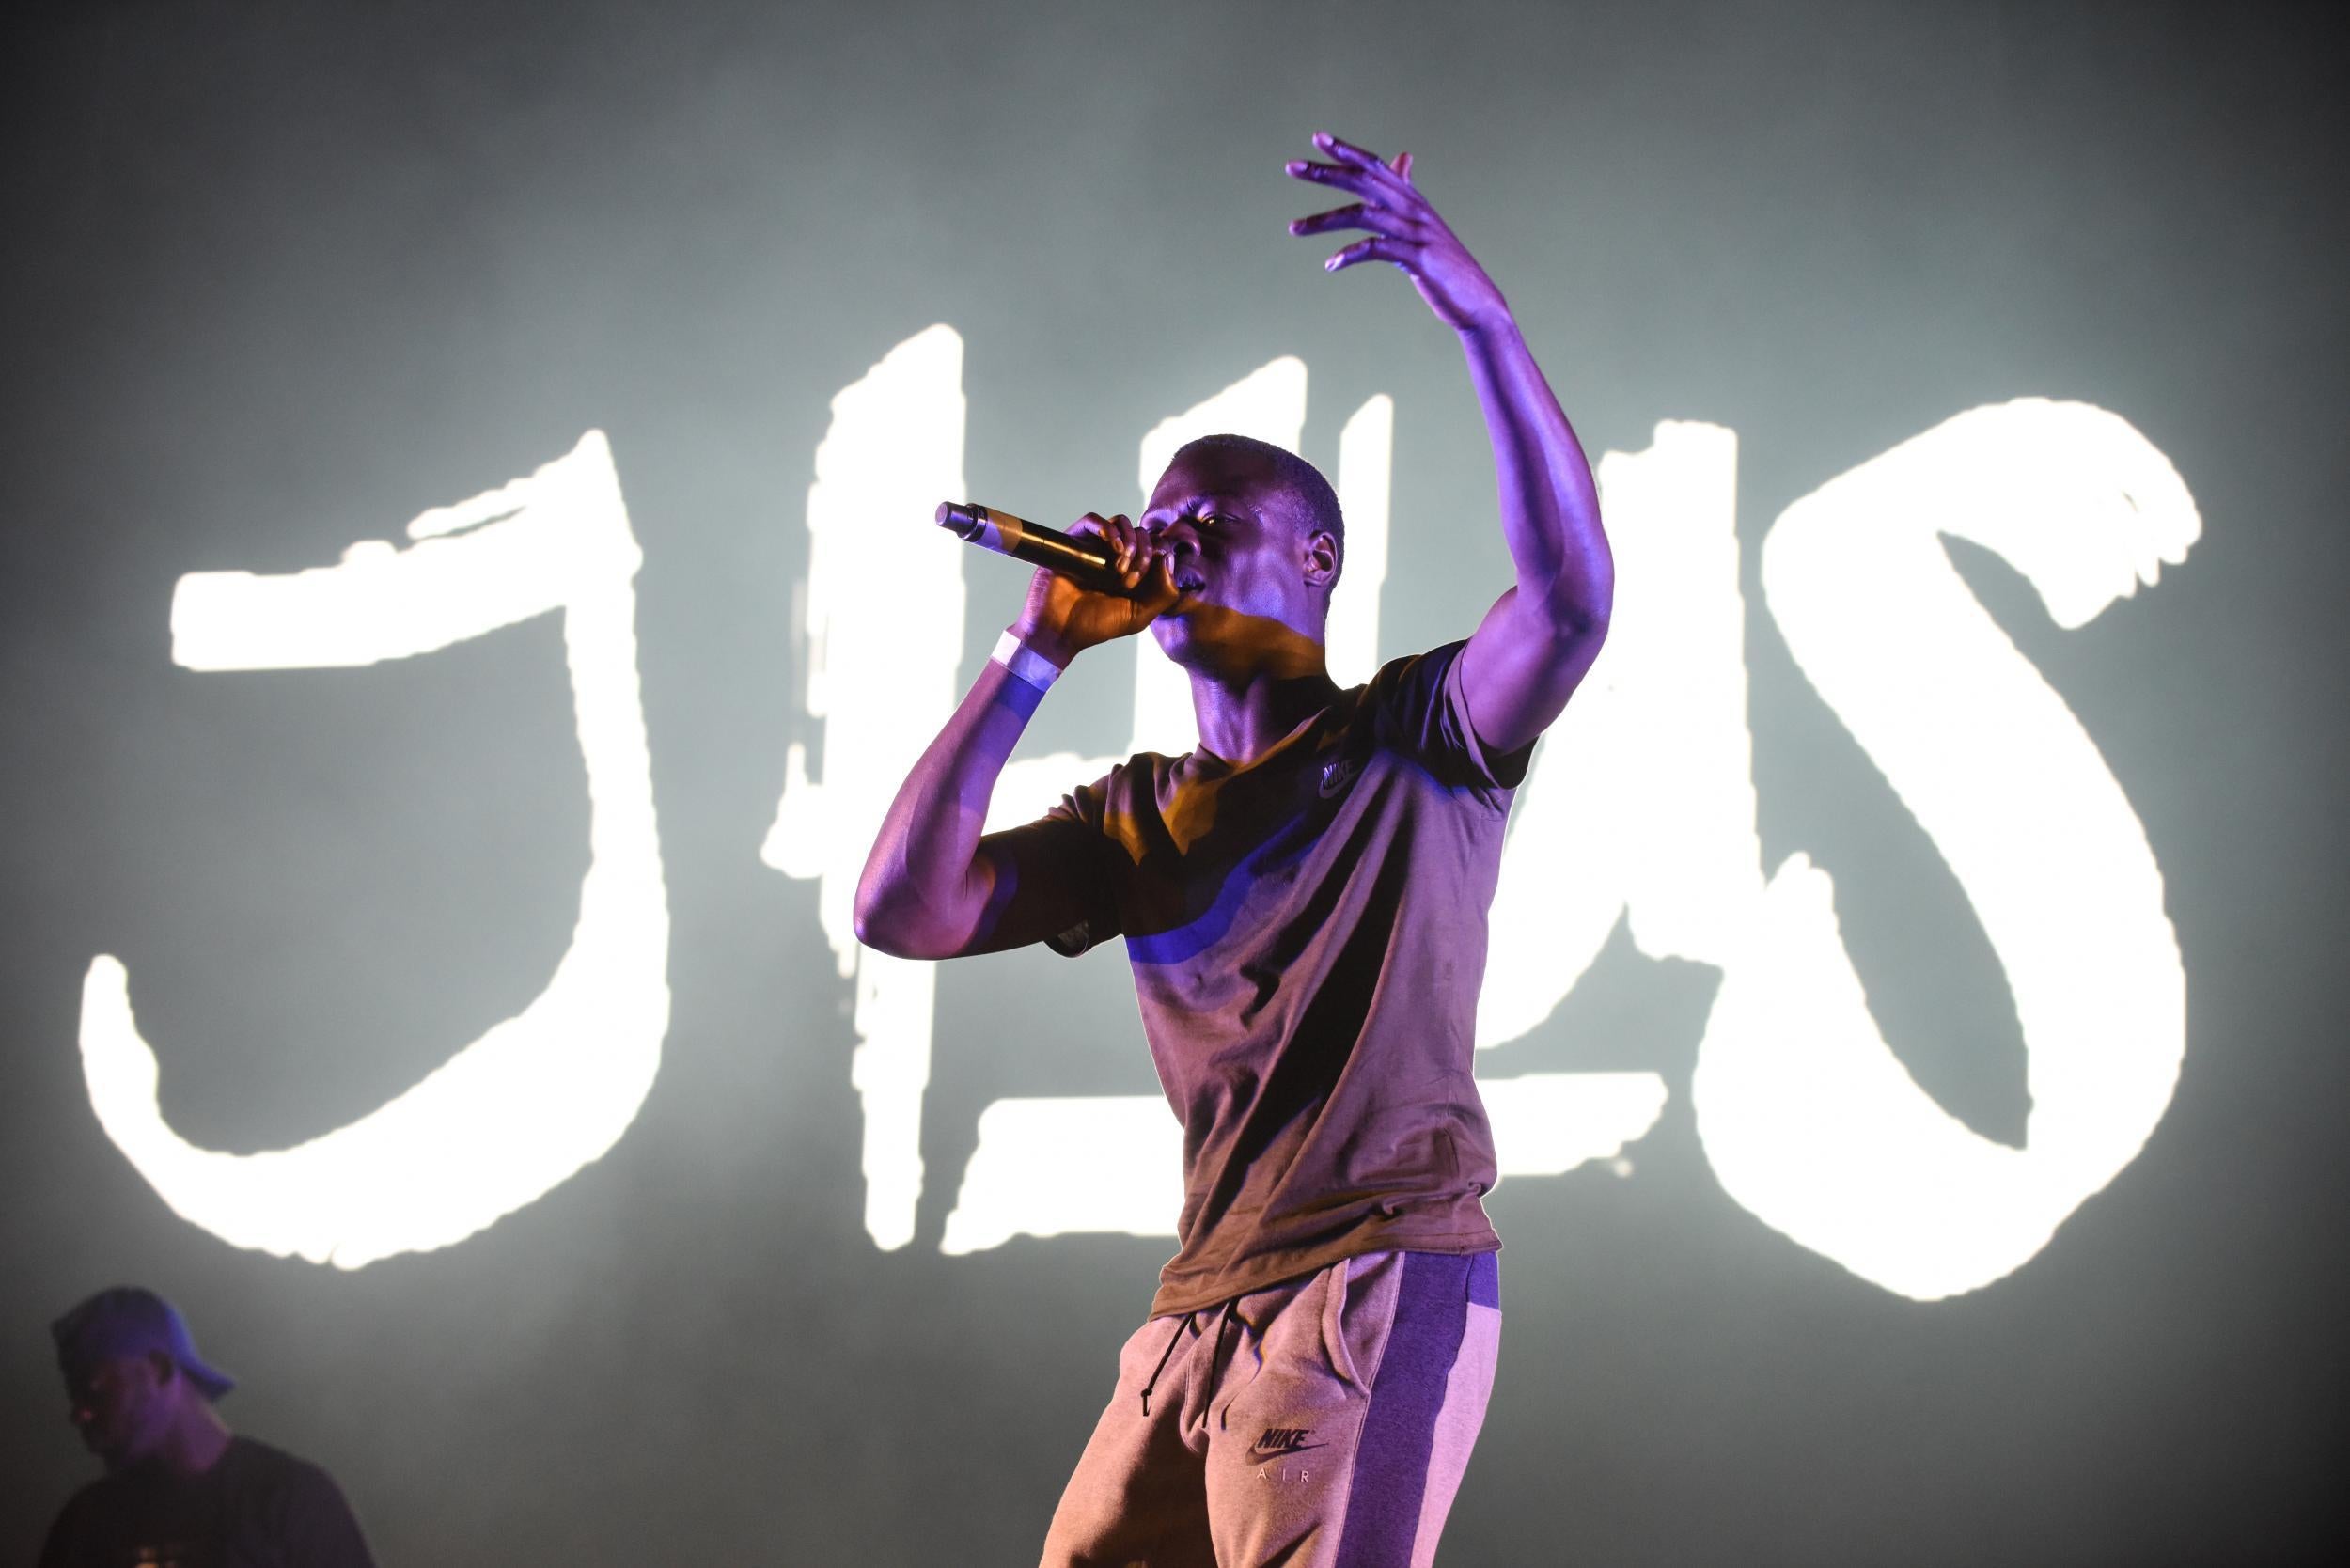 J Hus performs at the O2 Arena as part of the BBK takeover